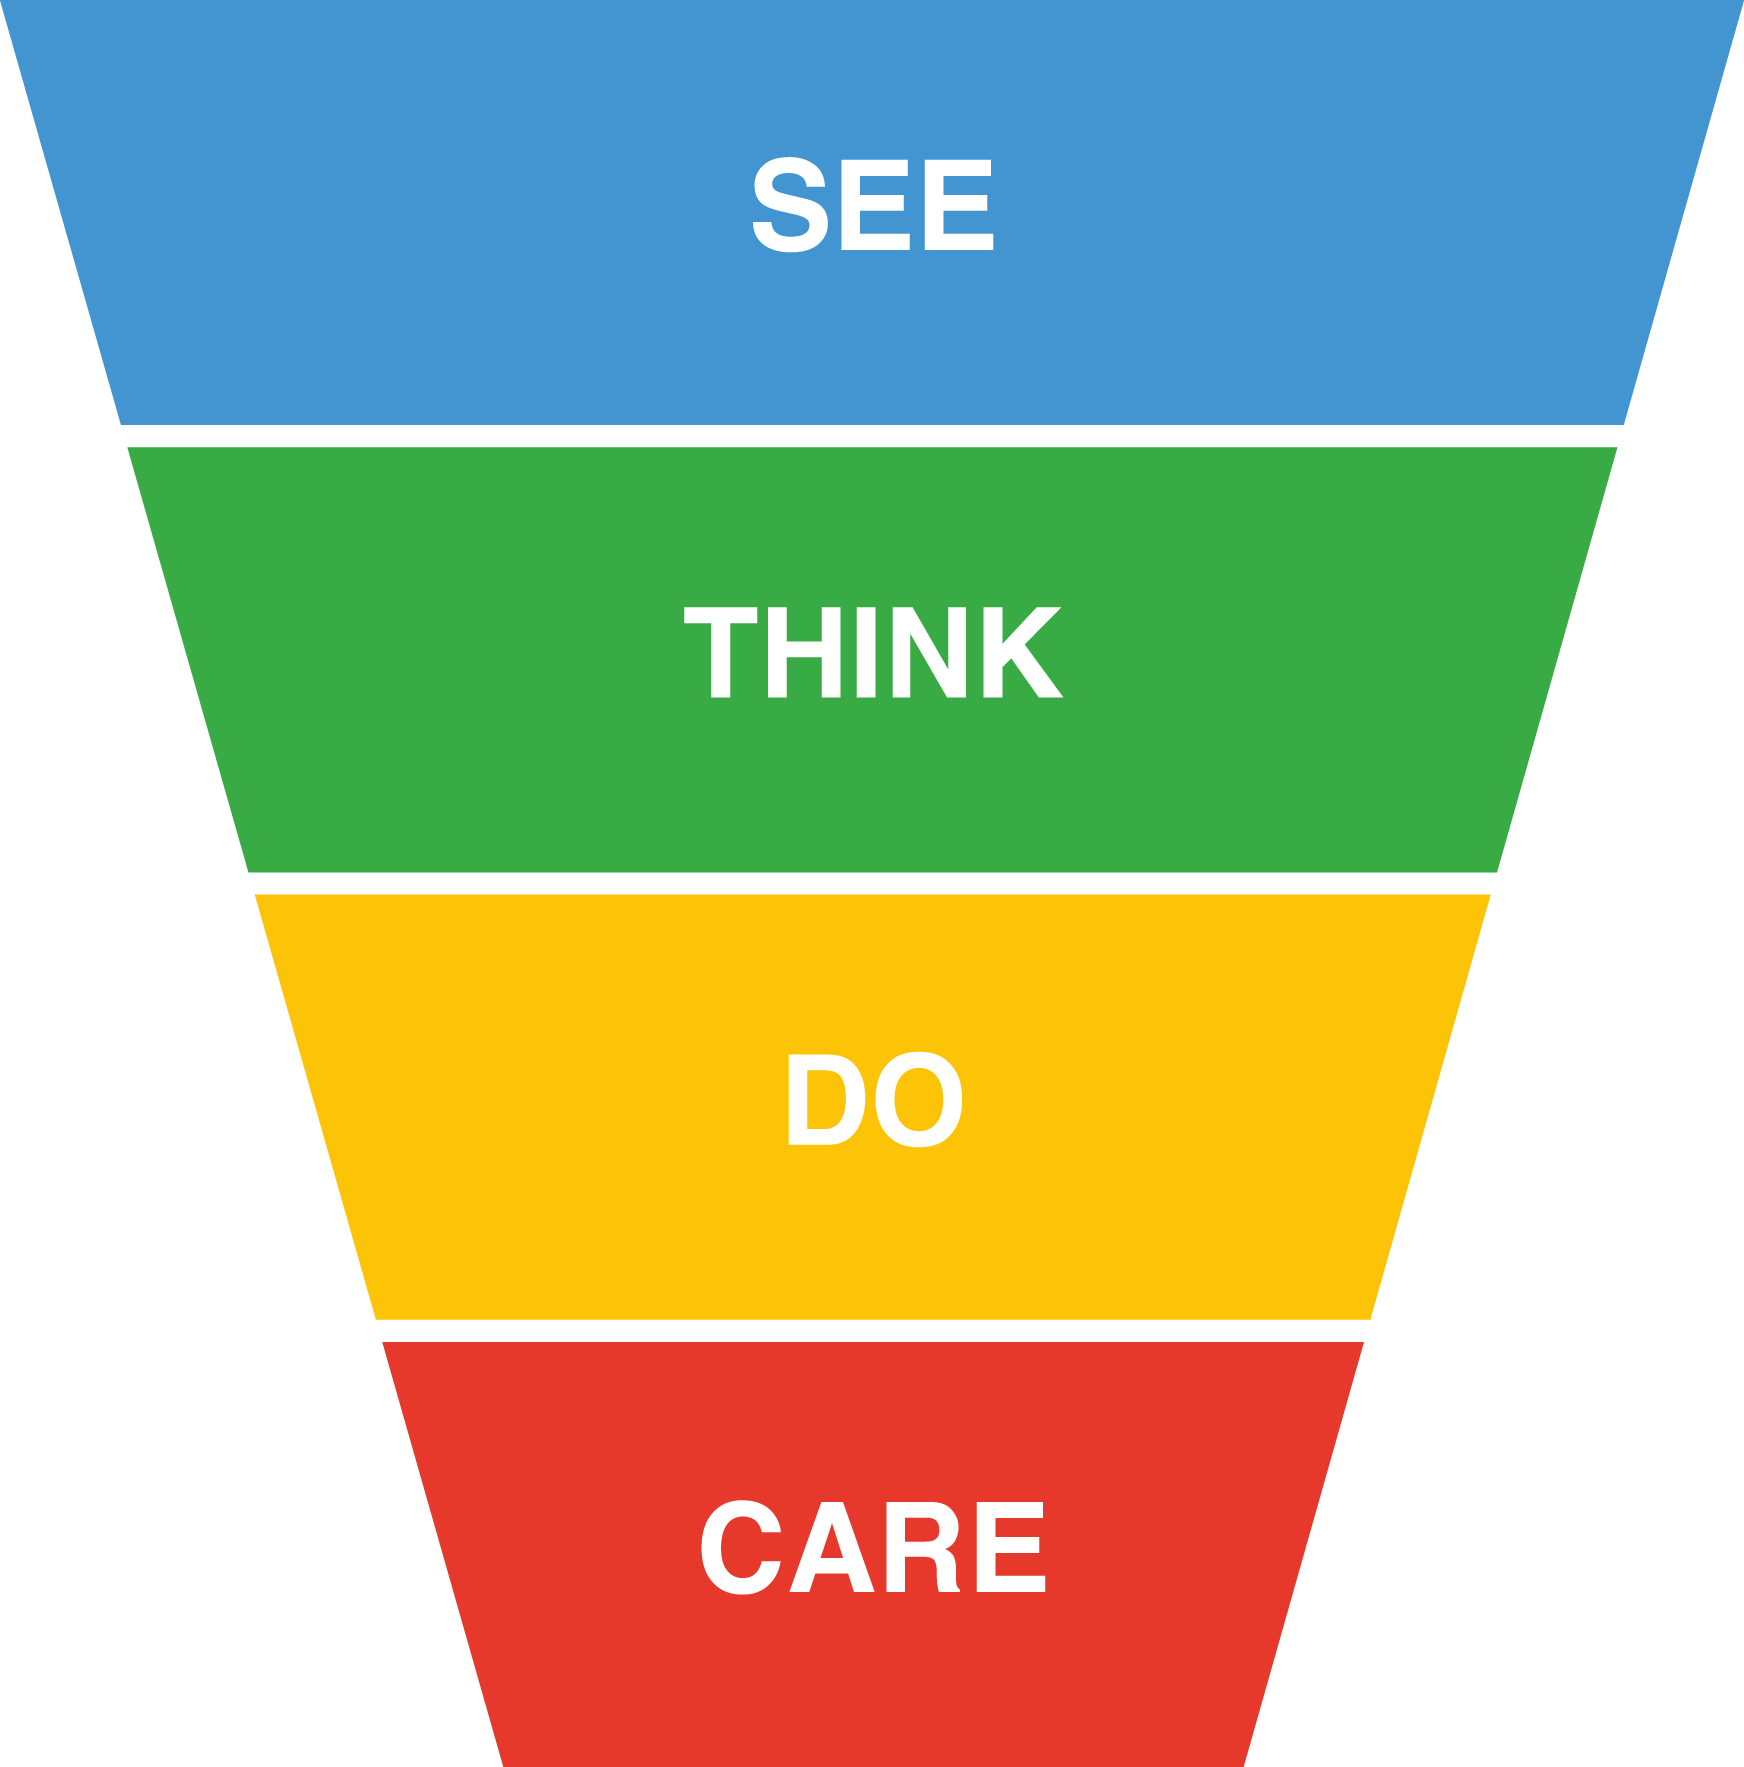 See, Think, Do, Care model